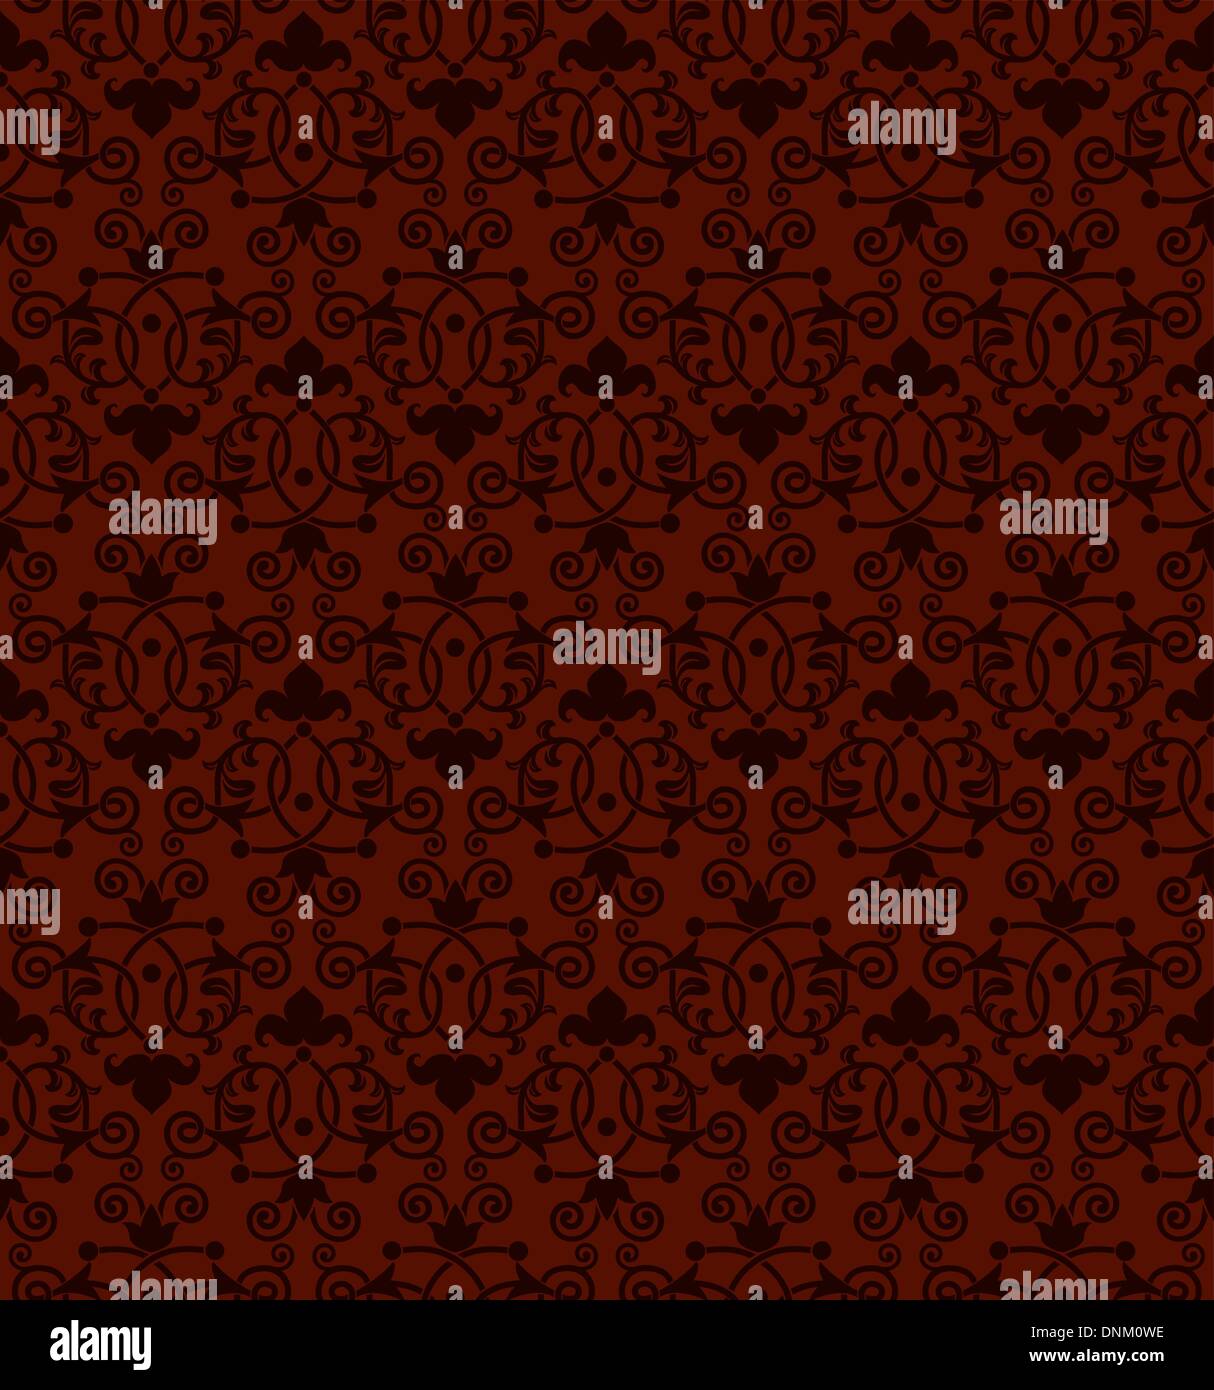 A seamless tiling antique Victorian style background pattern Stock Vector